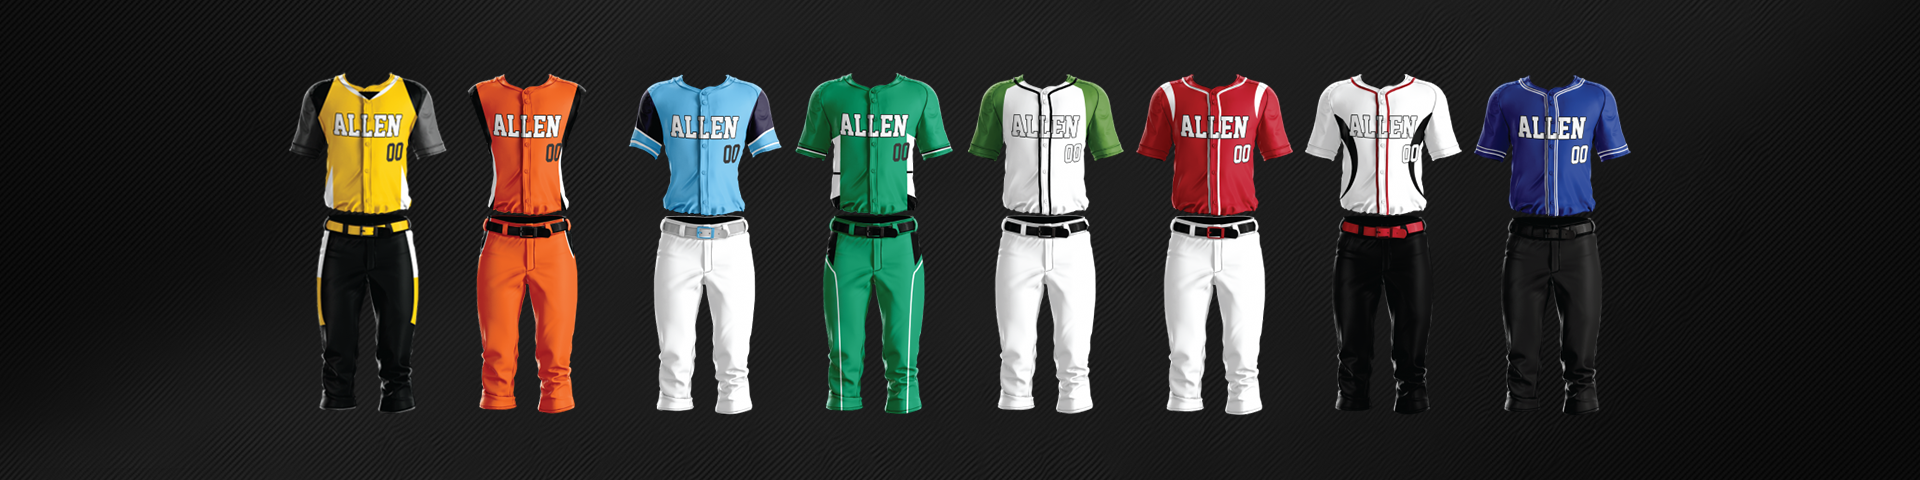 create your own baseball jersey